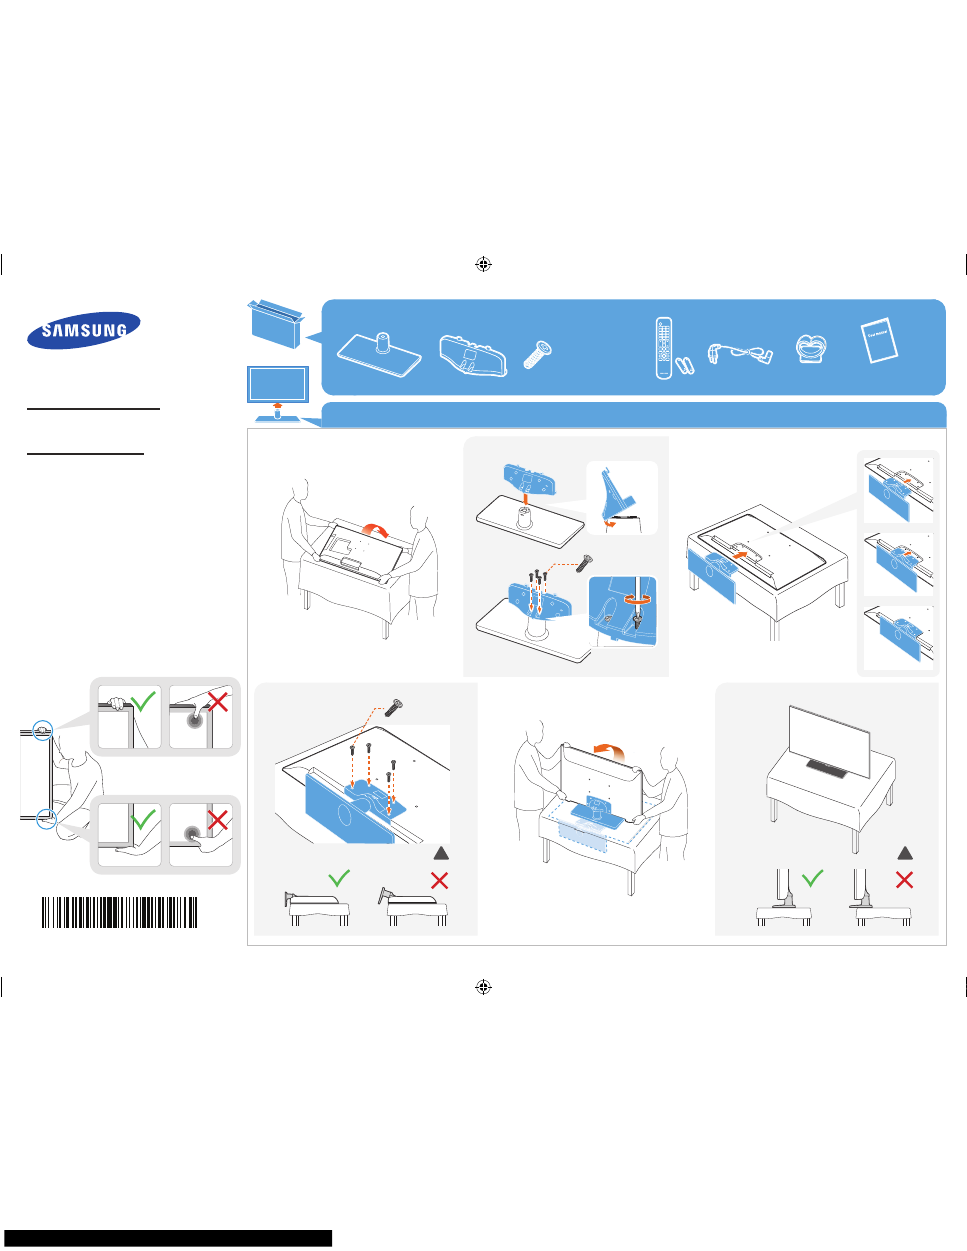 Smart Tv Samsung Manual And Download